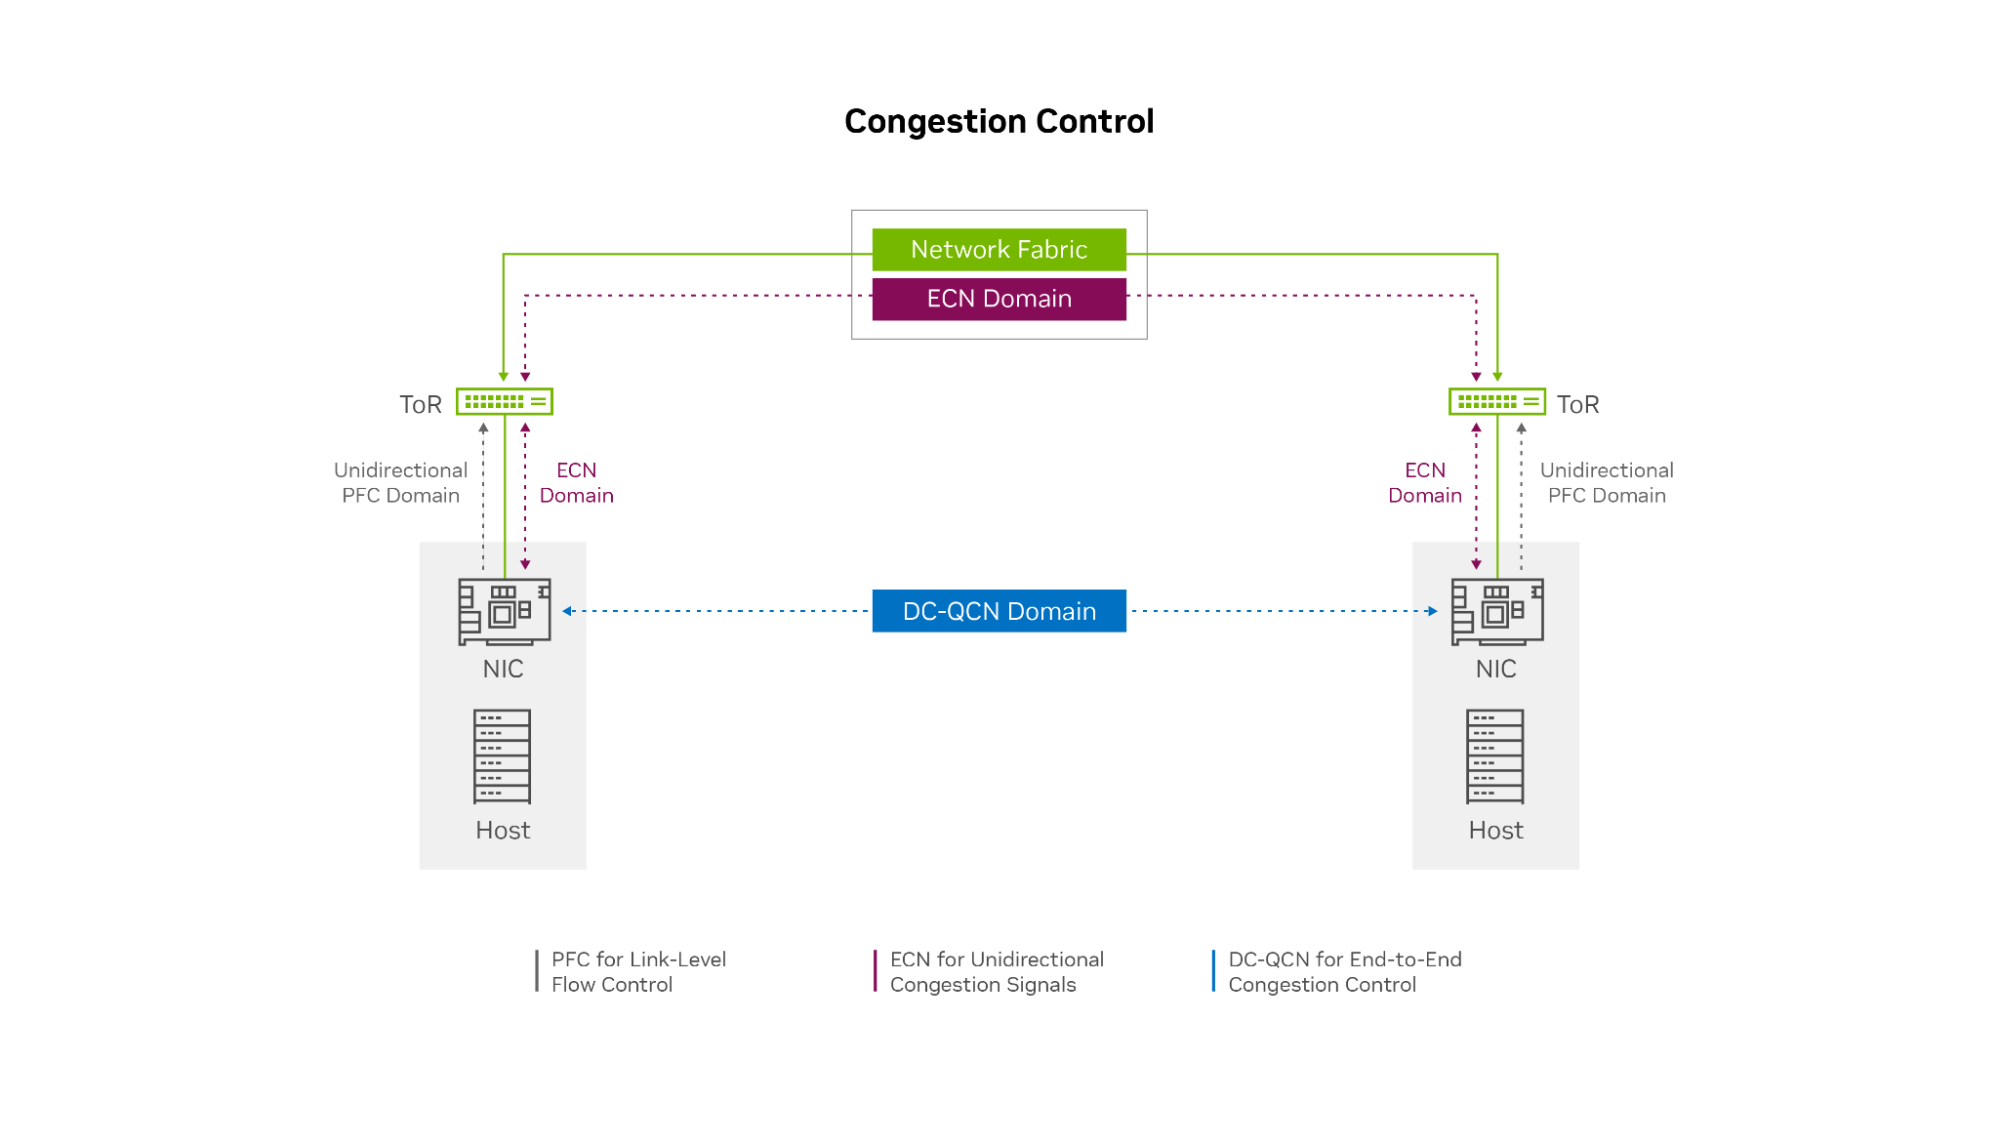 A graph shows how the OCI network uses RoCE with priority flow control at the link level, explicit congestion notification for unidirectional congestion signaling and data center quantized congestion notification for end-to-end congestion control.